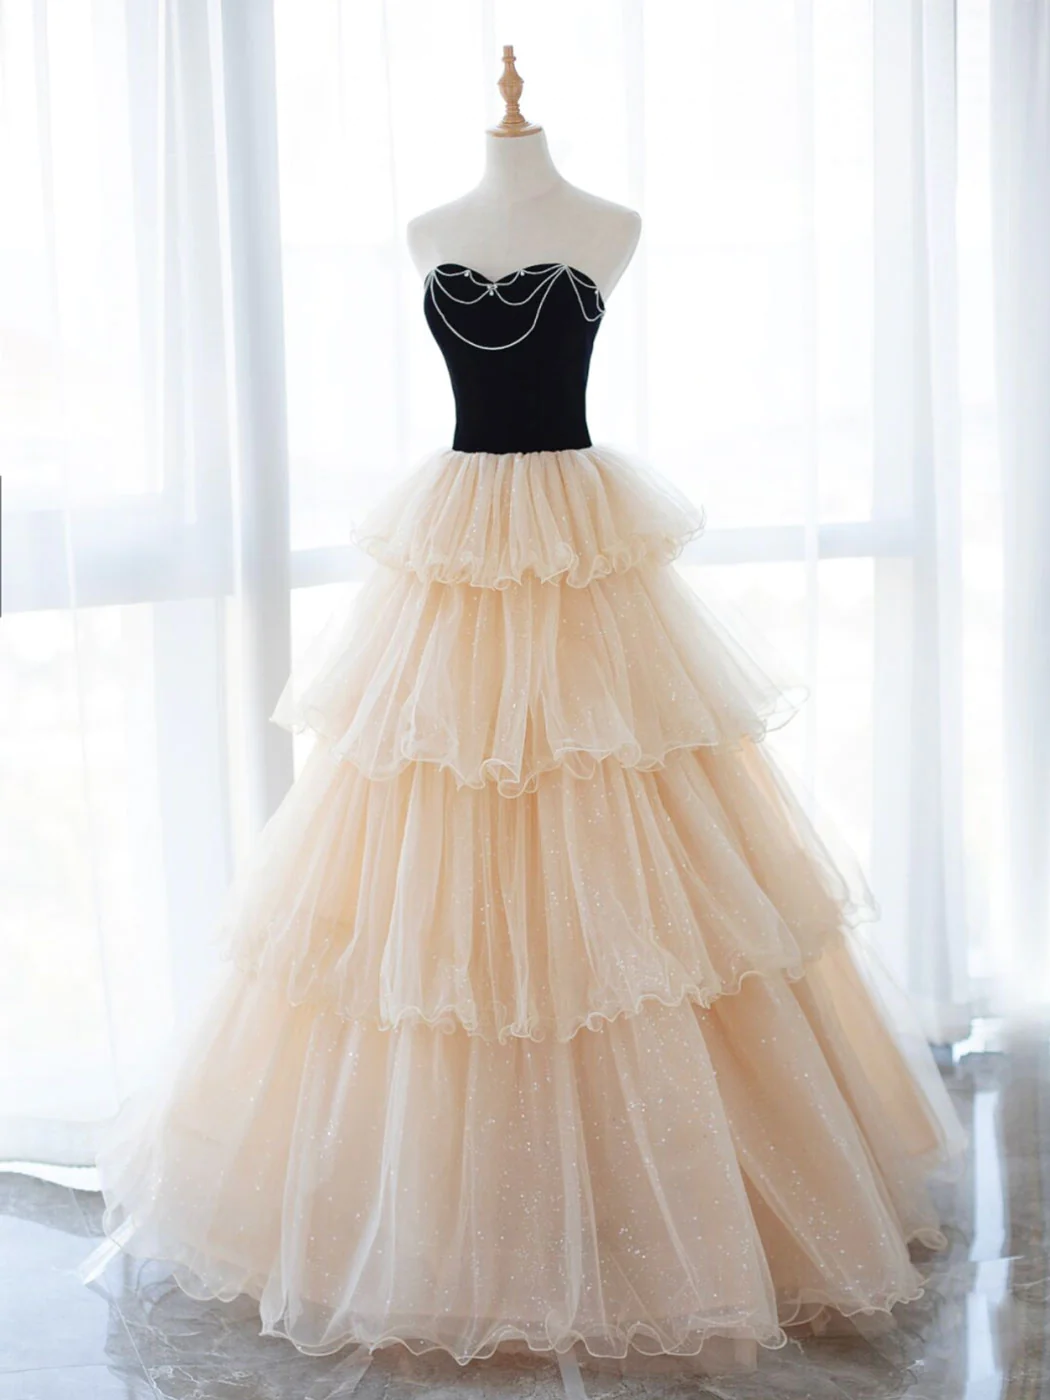 Champagne And Black Etoile Tulle Ball Gown